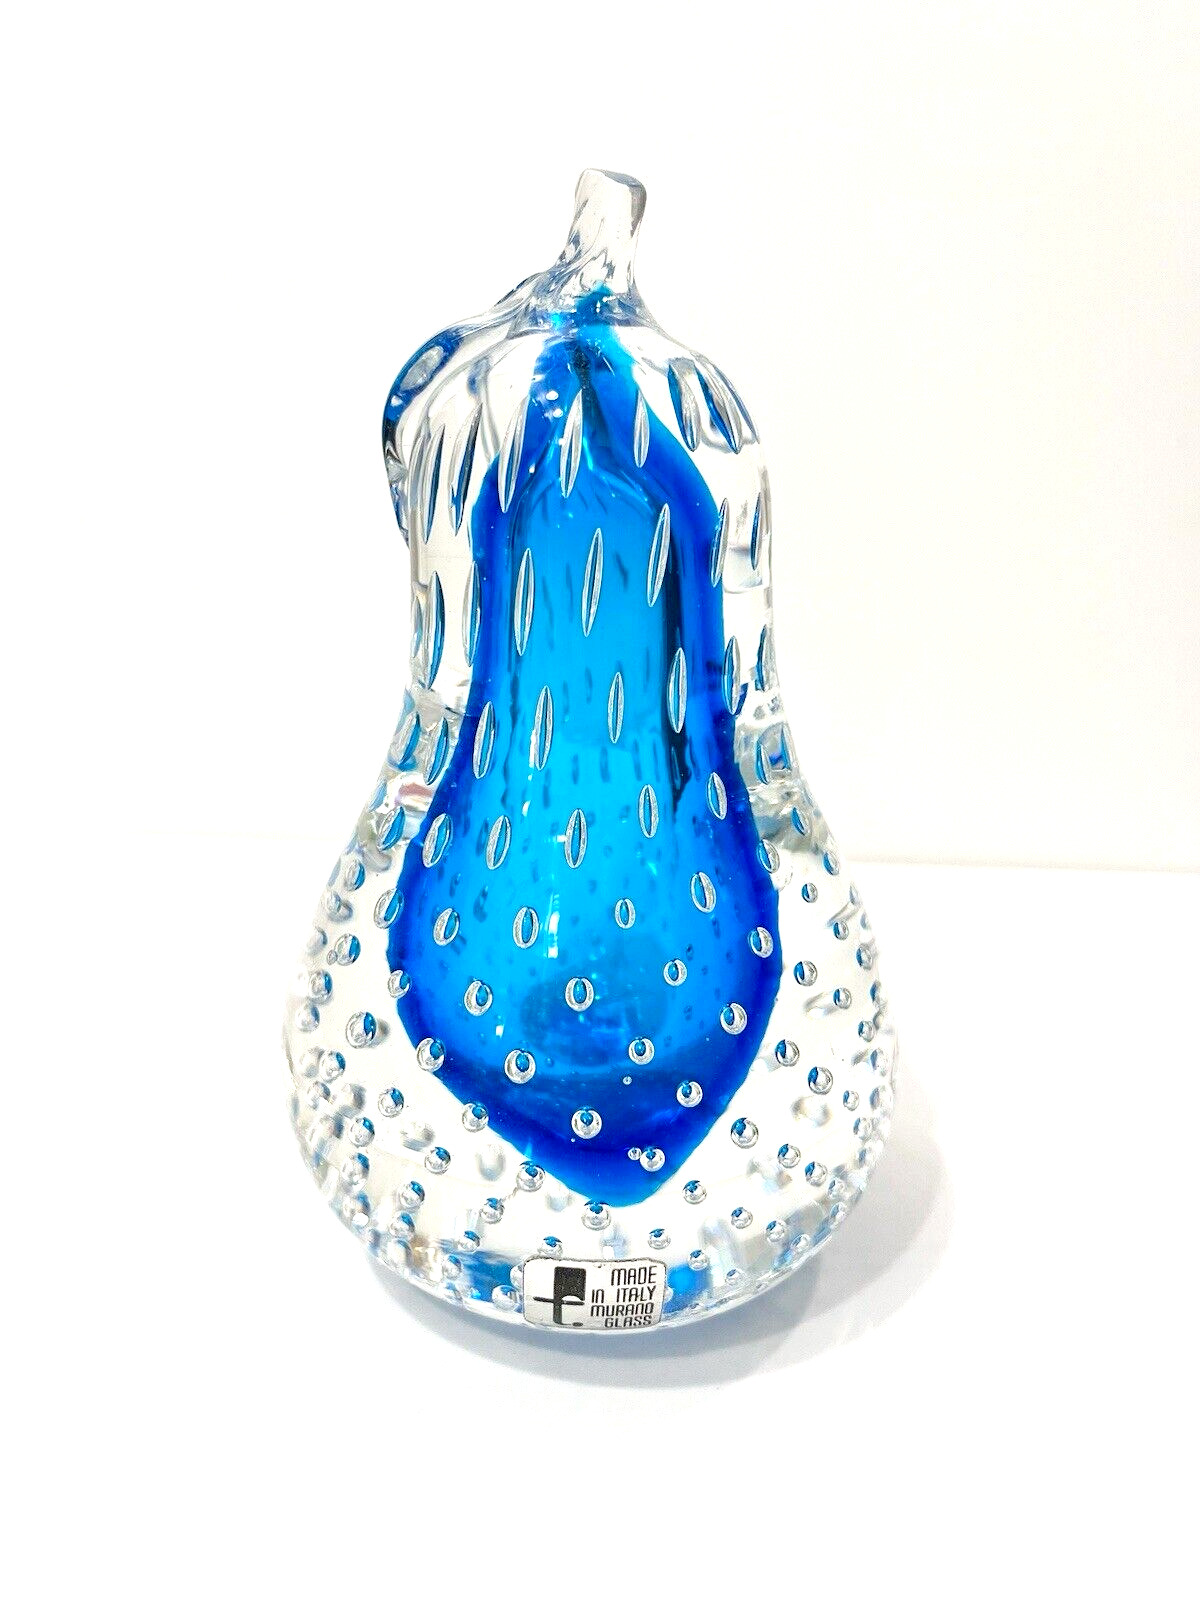 Vintage Murano Glass Fratelli Toso Labeled Bullicante Sommerso Blue Pear